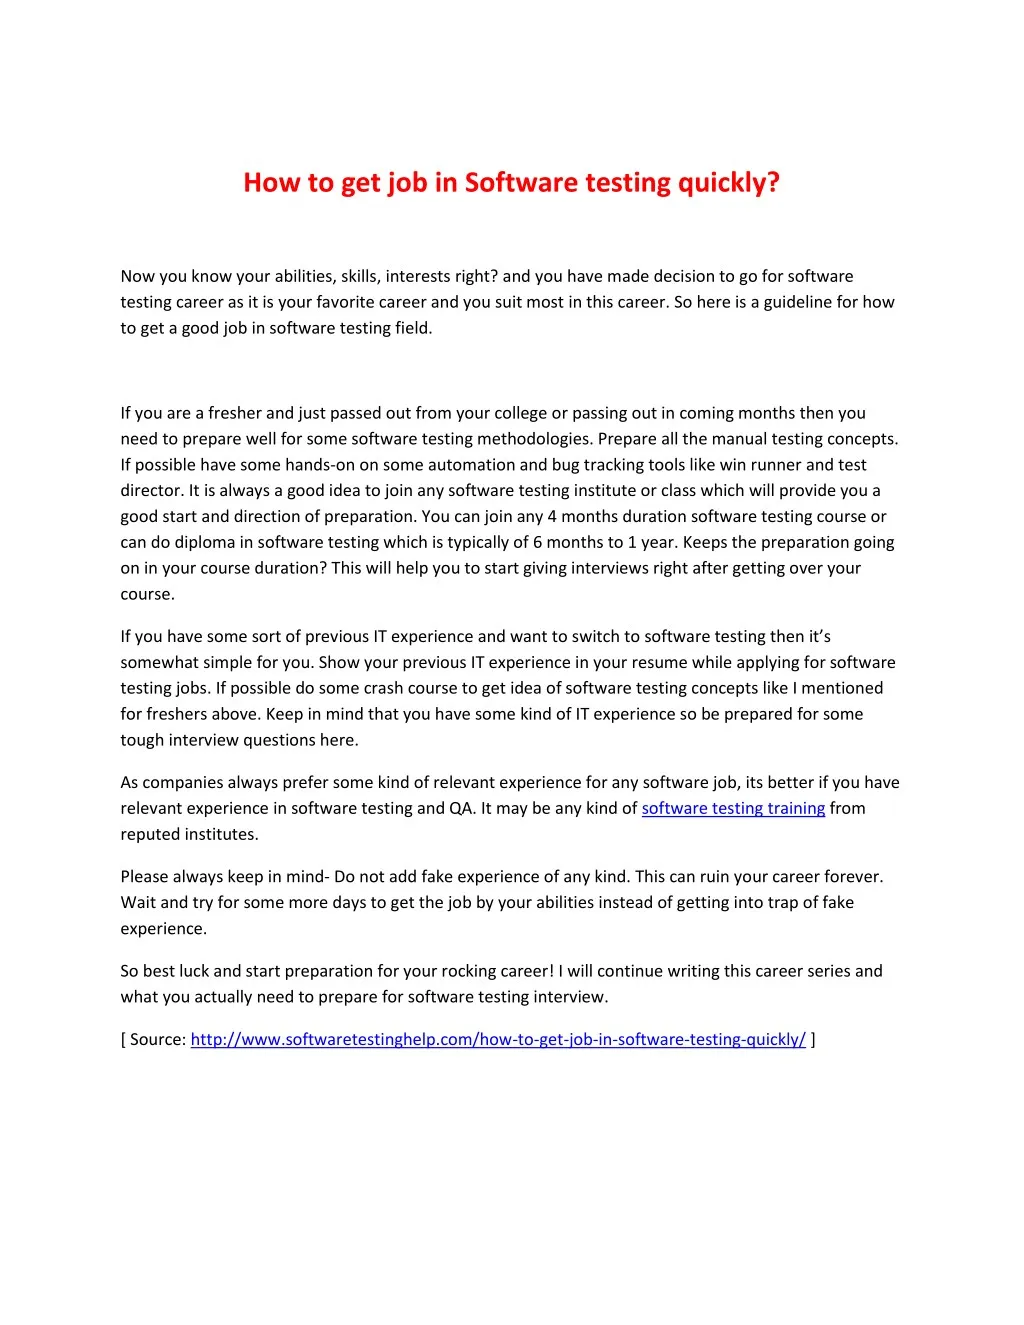 how to get job in software testing quickly